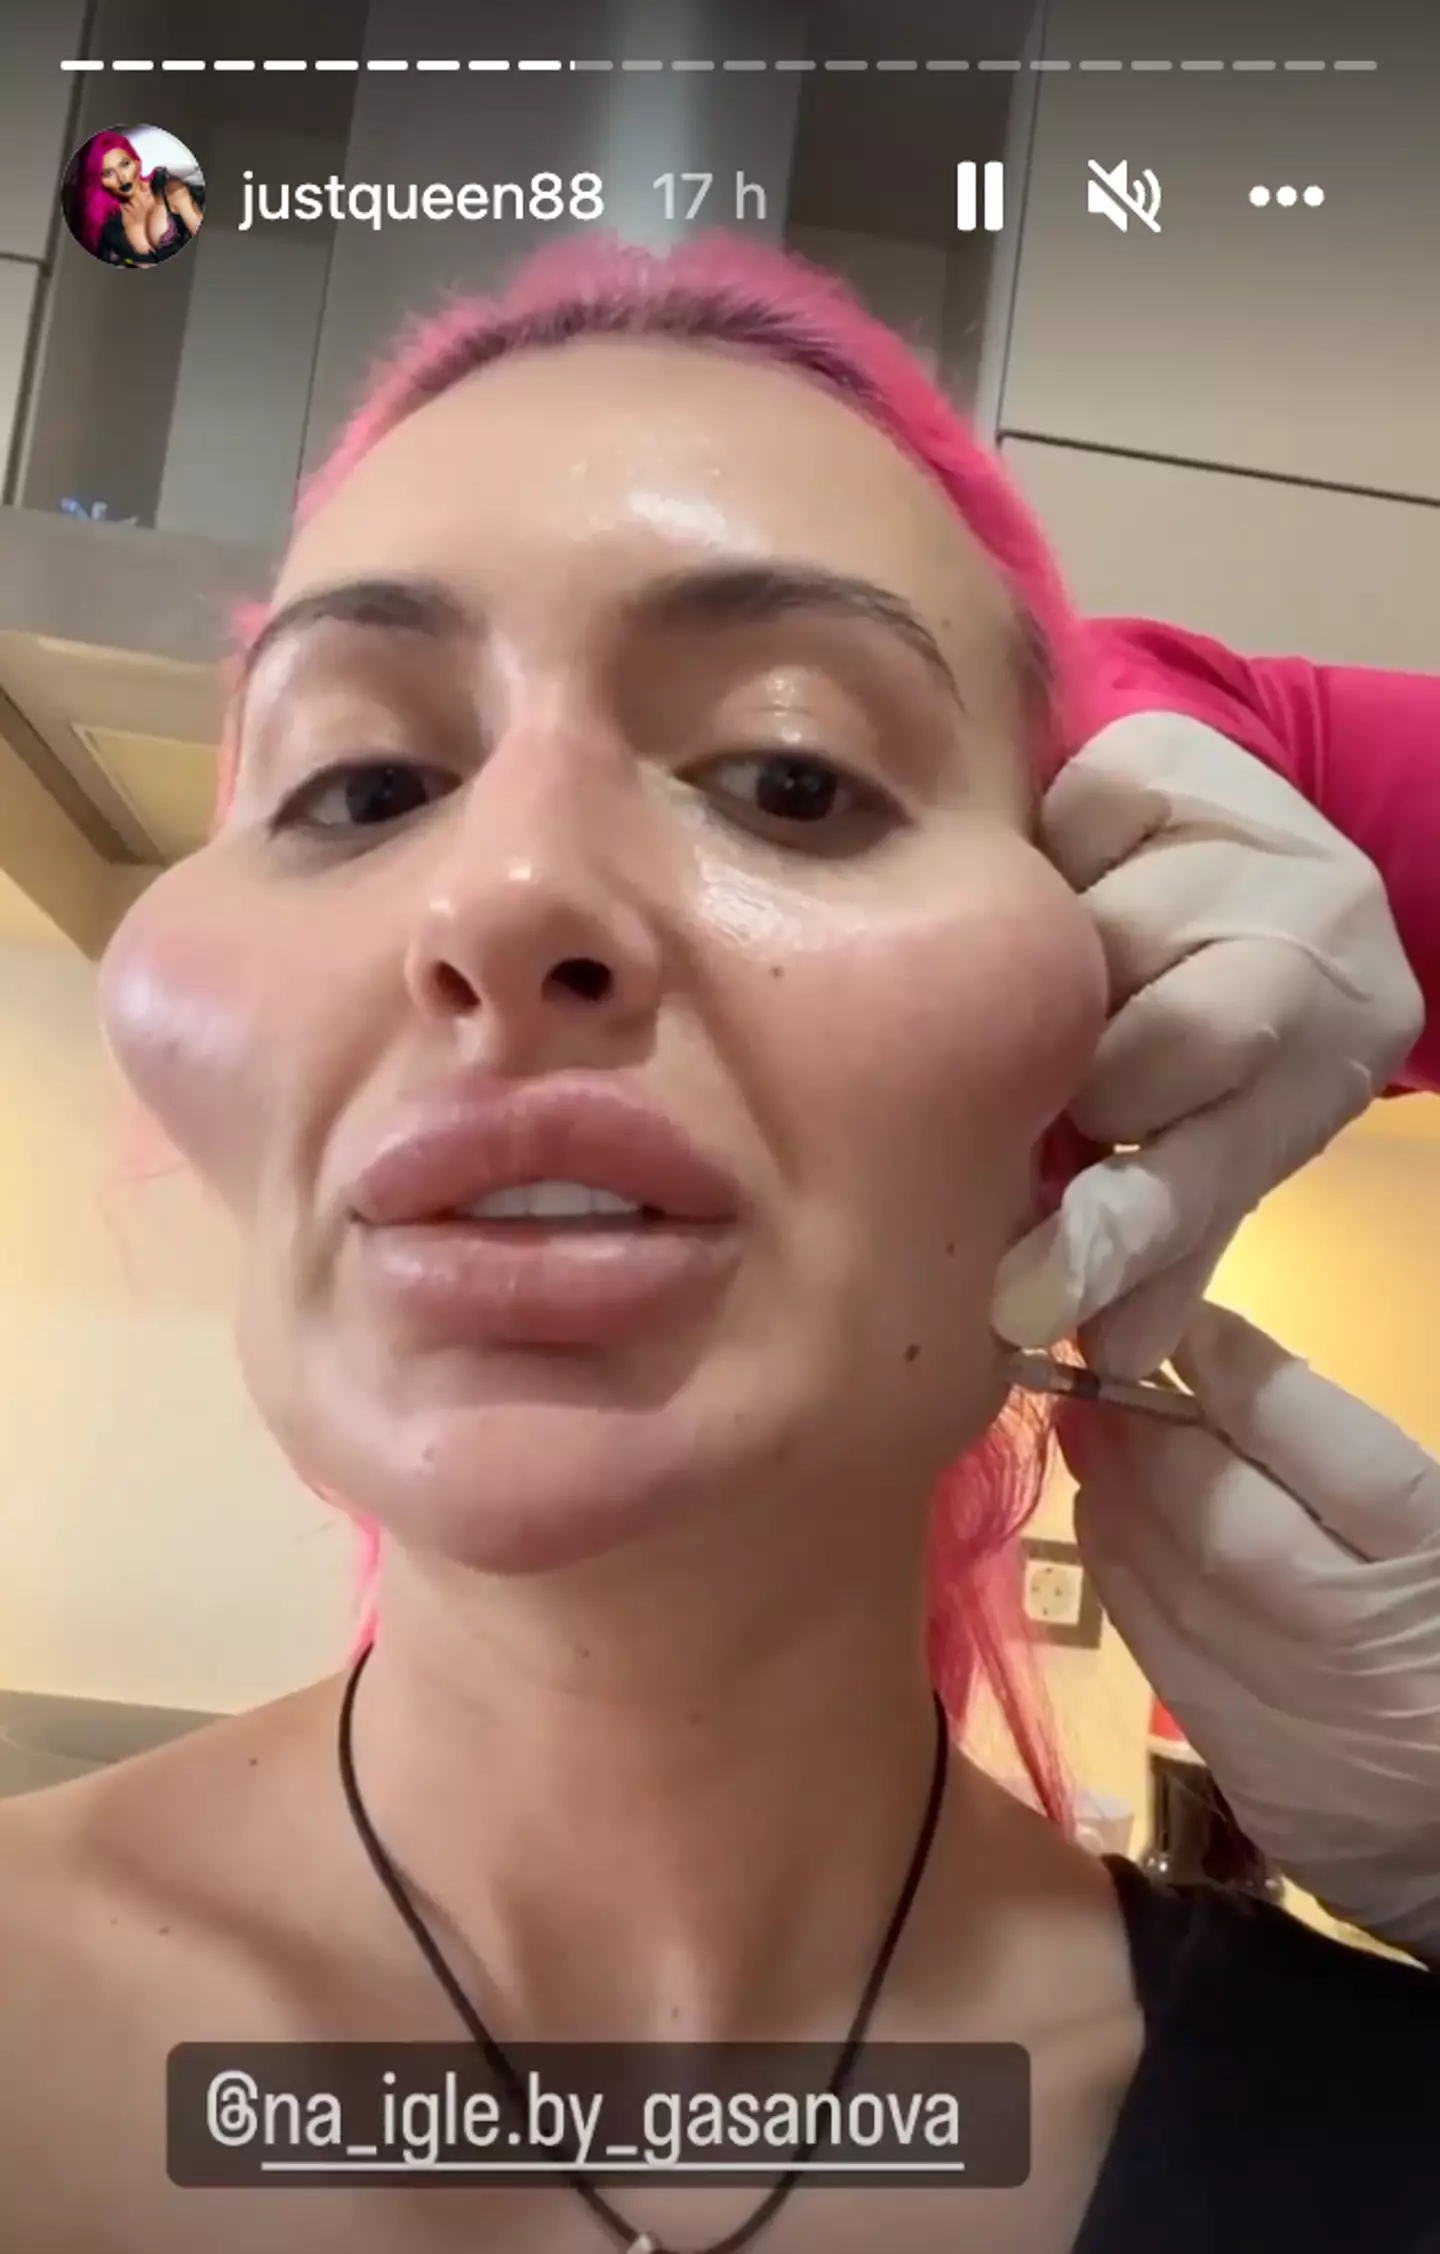 The model took to Instagram Stories to reveal her latest procedure.